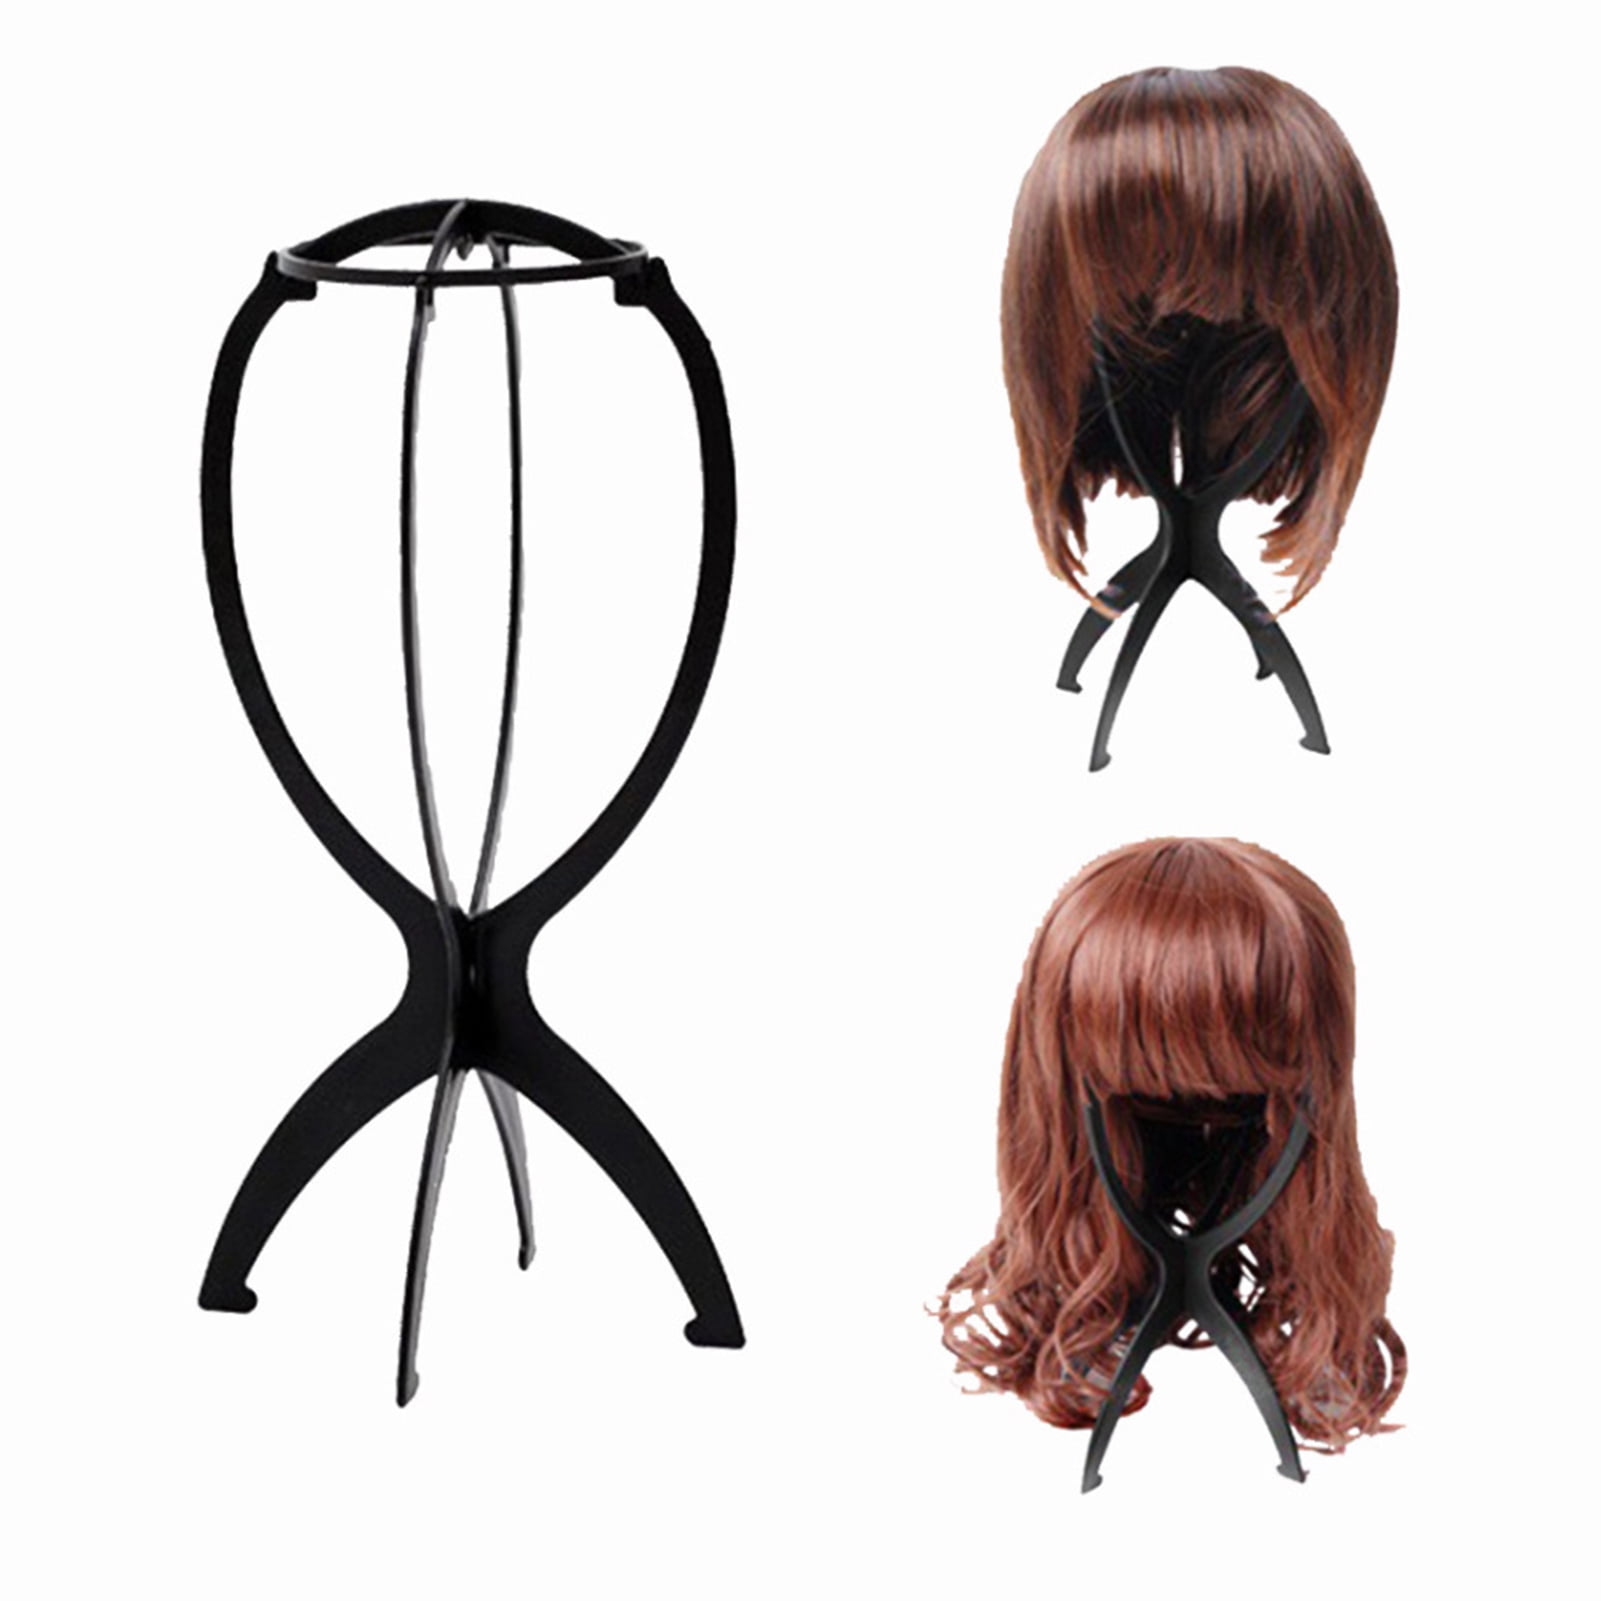 Travelwant 2Pcs/Set Wig Stand Holder, Premium Portable Collapsible Wig Holder for Multiple Wigs, Durable Wig Stands for Women, Size: One size, Black